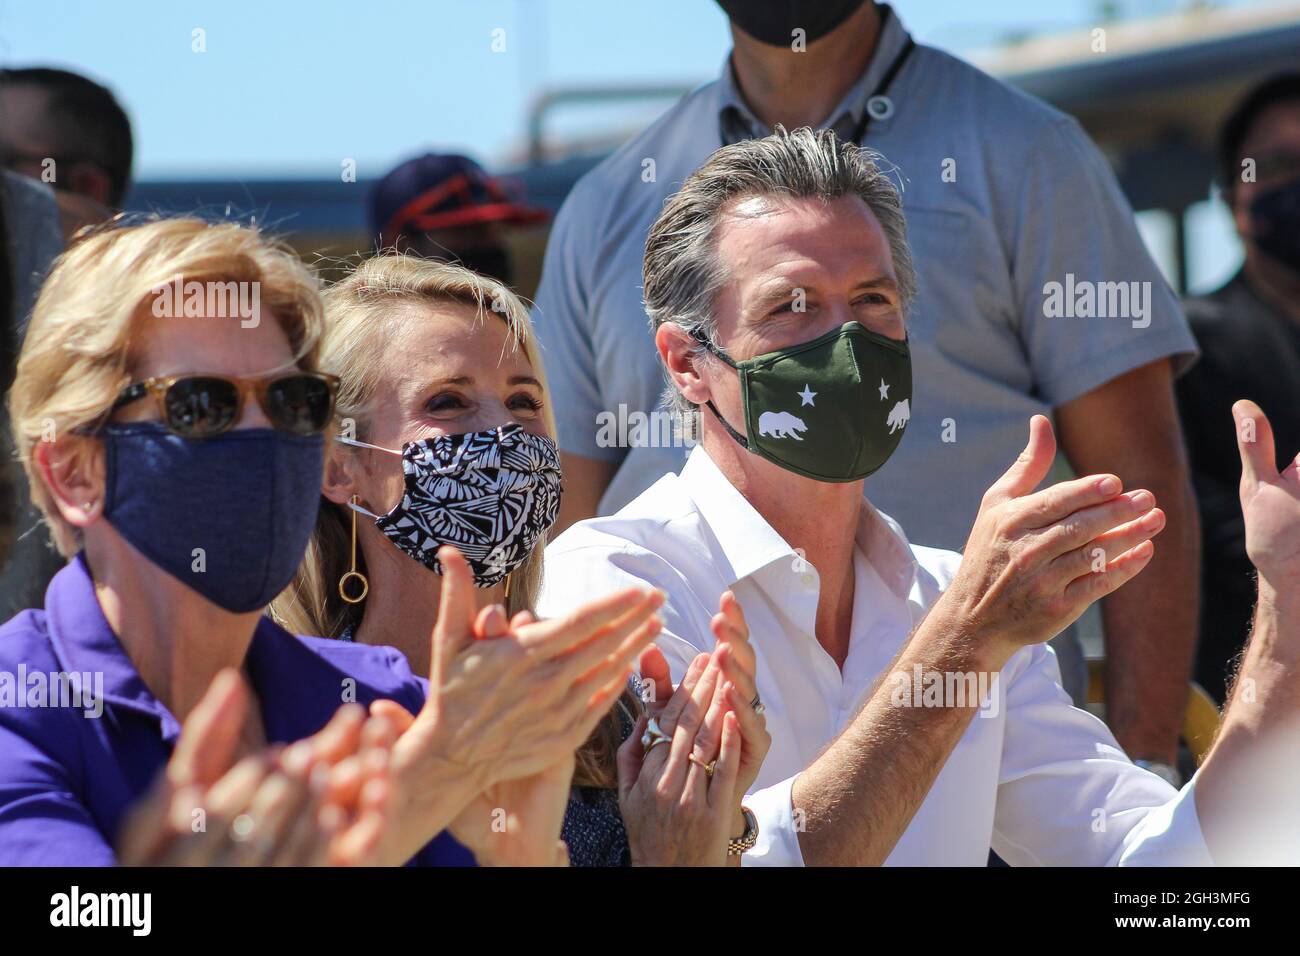 Los Angeles, USA. 04th Sep, 2021. Senator Elizabeth Warren campaigns with Governor Gavin Newsom and First Partner Jennifer Siebel Newsom at a 'Vote No' rally in Los Angeles, California on September 4, 2021. (Photo by Conor Duffy/Sipa USA) Credit: Sipa USA/Alamy Live News Stock Photo